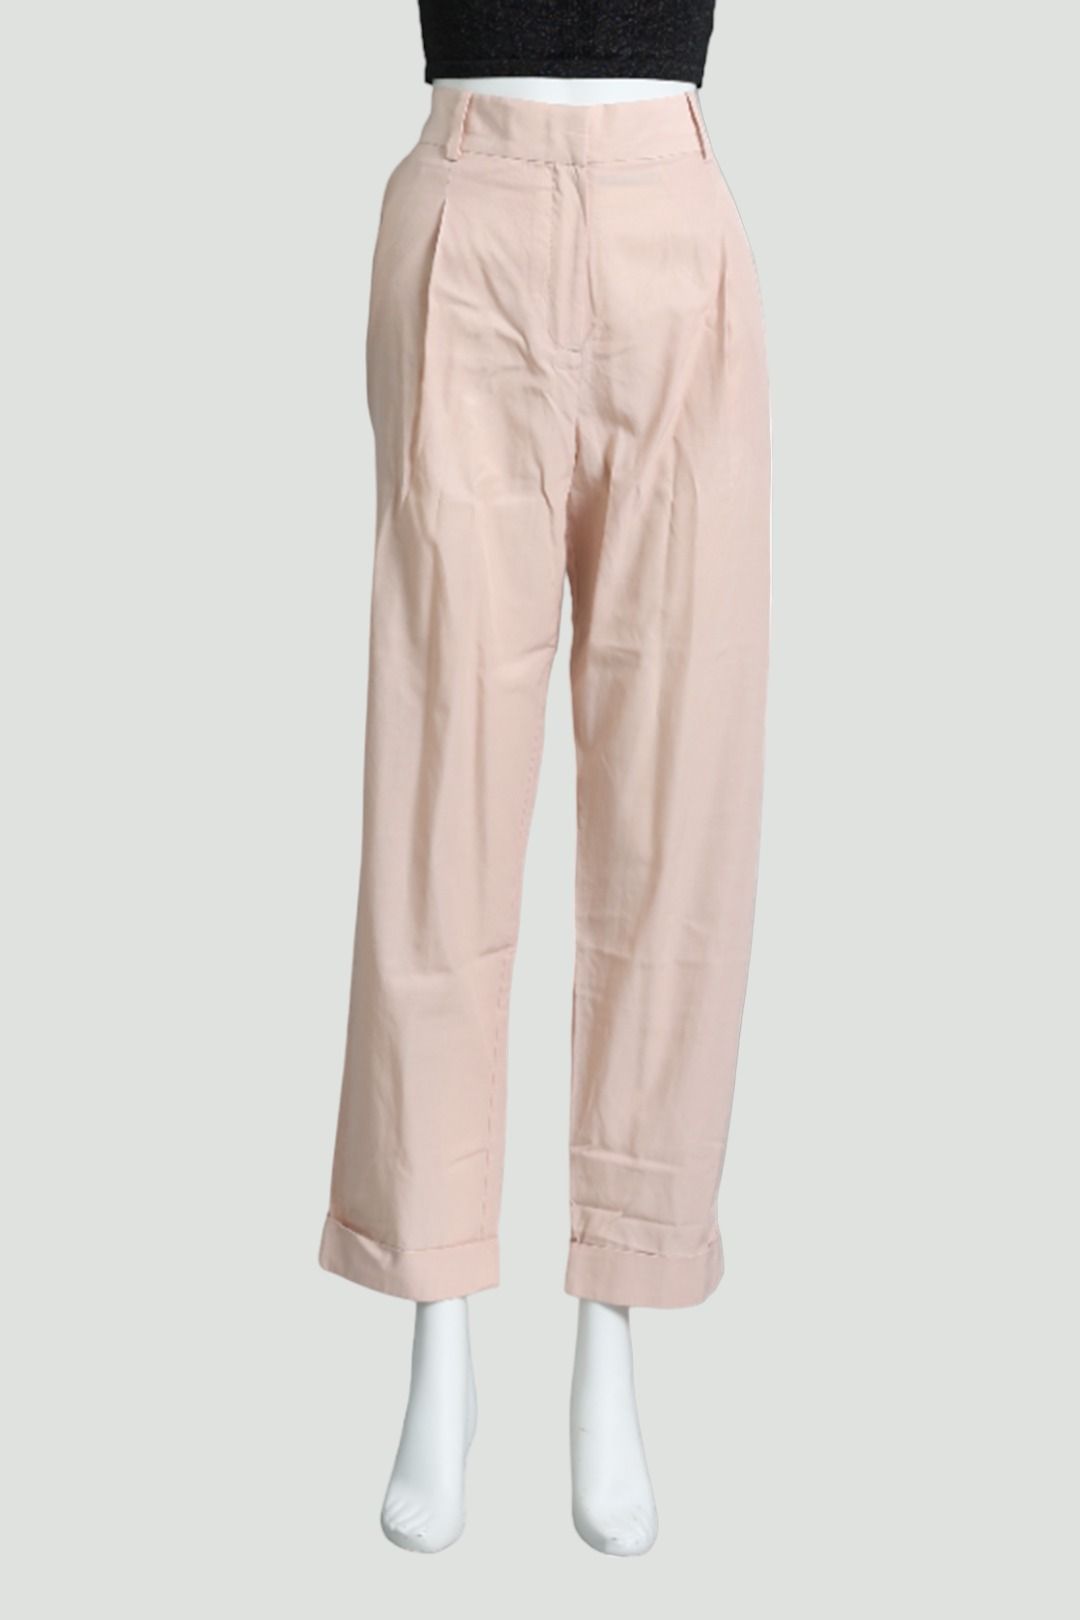 Cos - Oxford Tailored Trouser in Pink